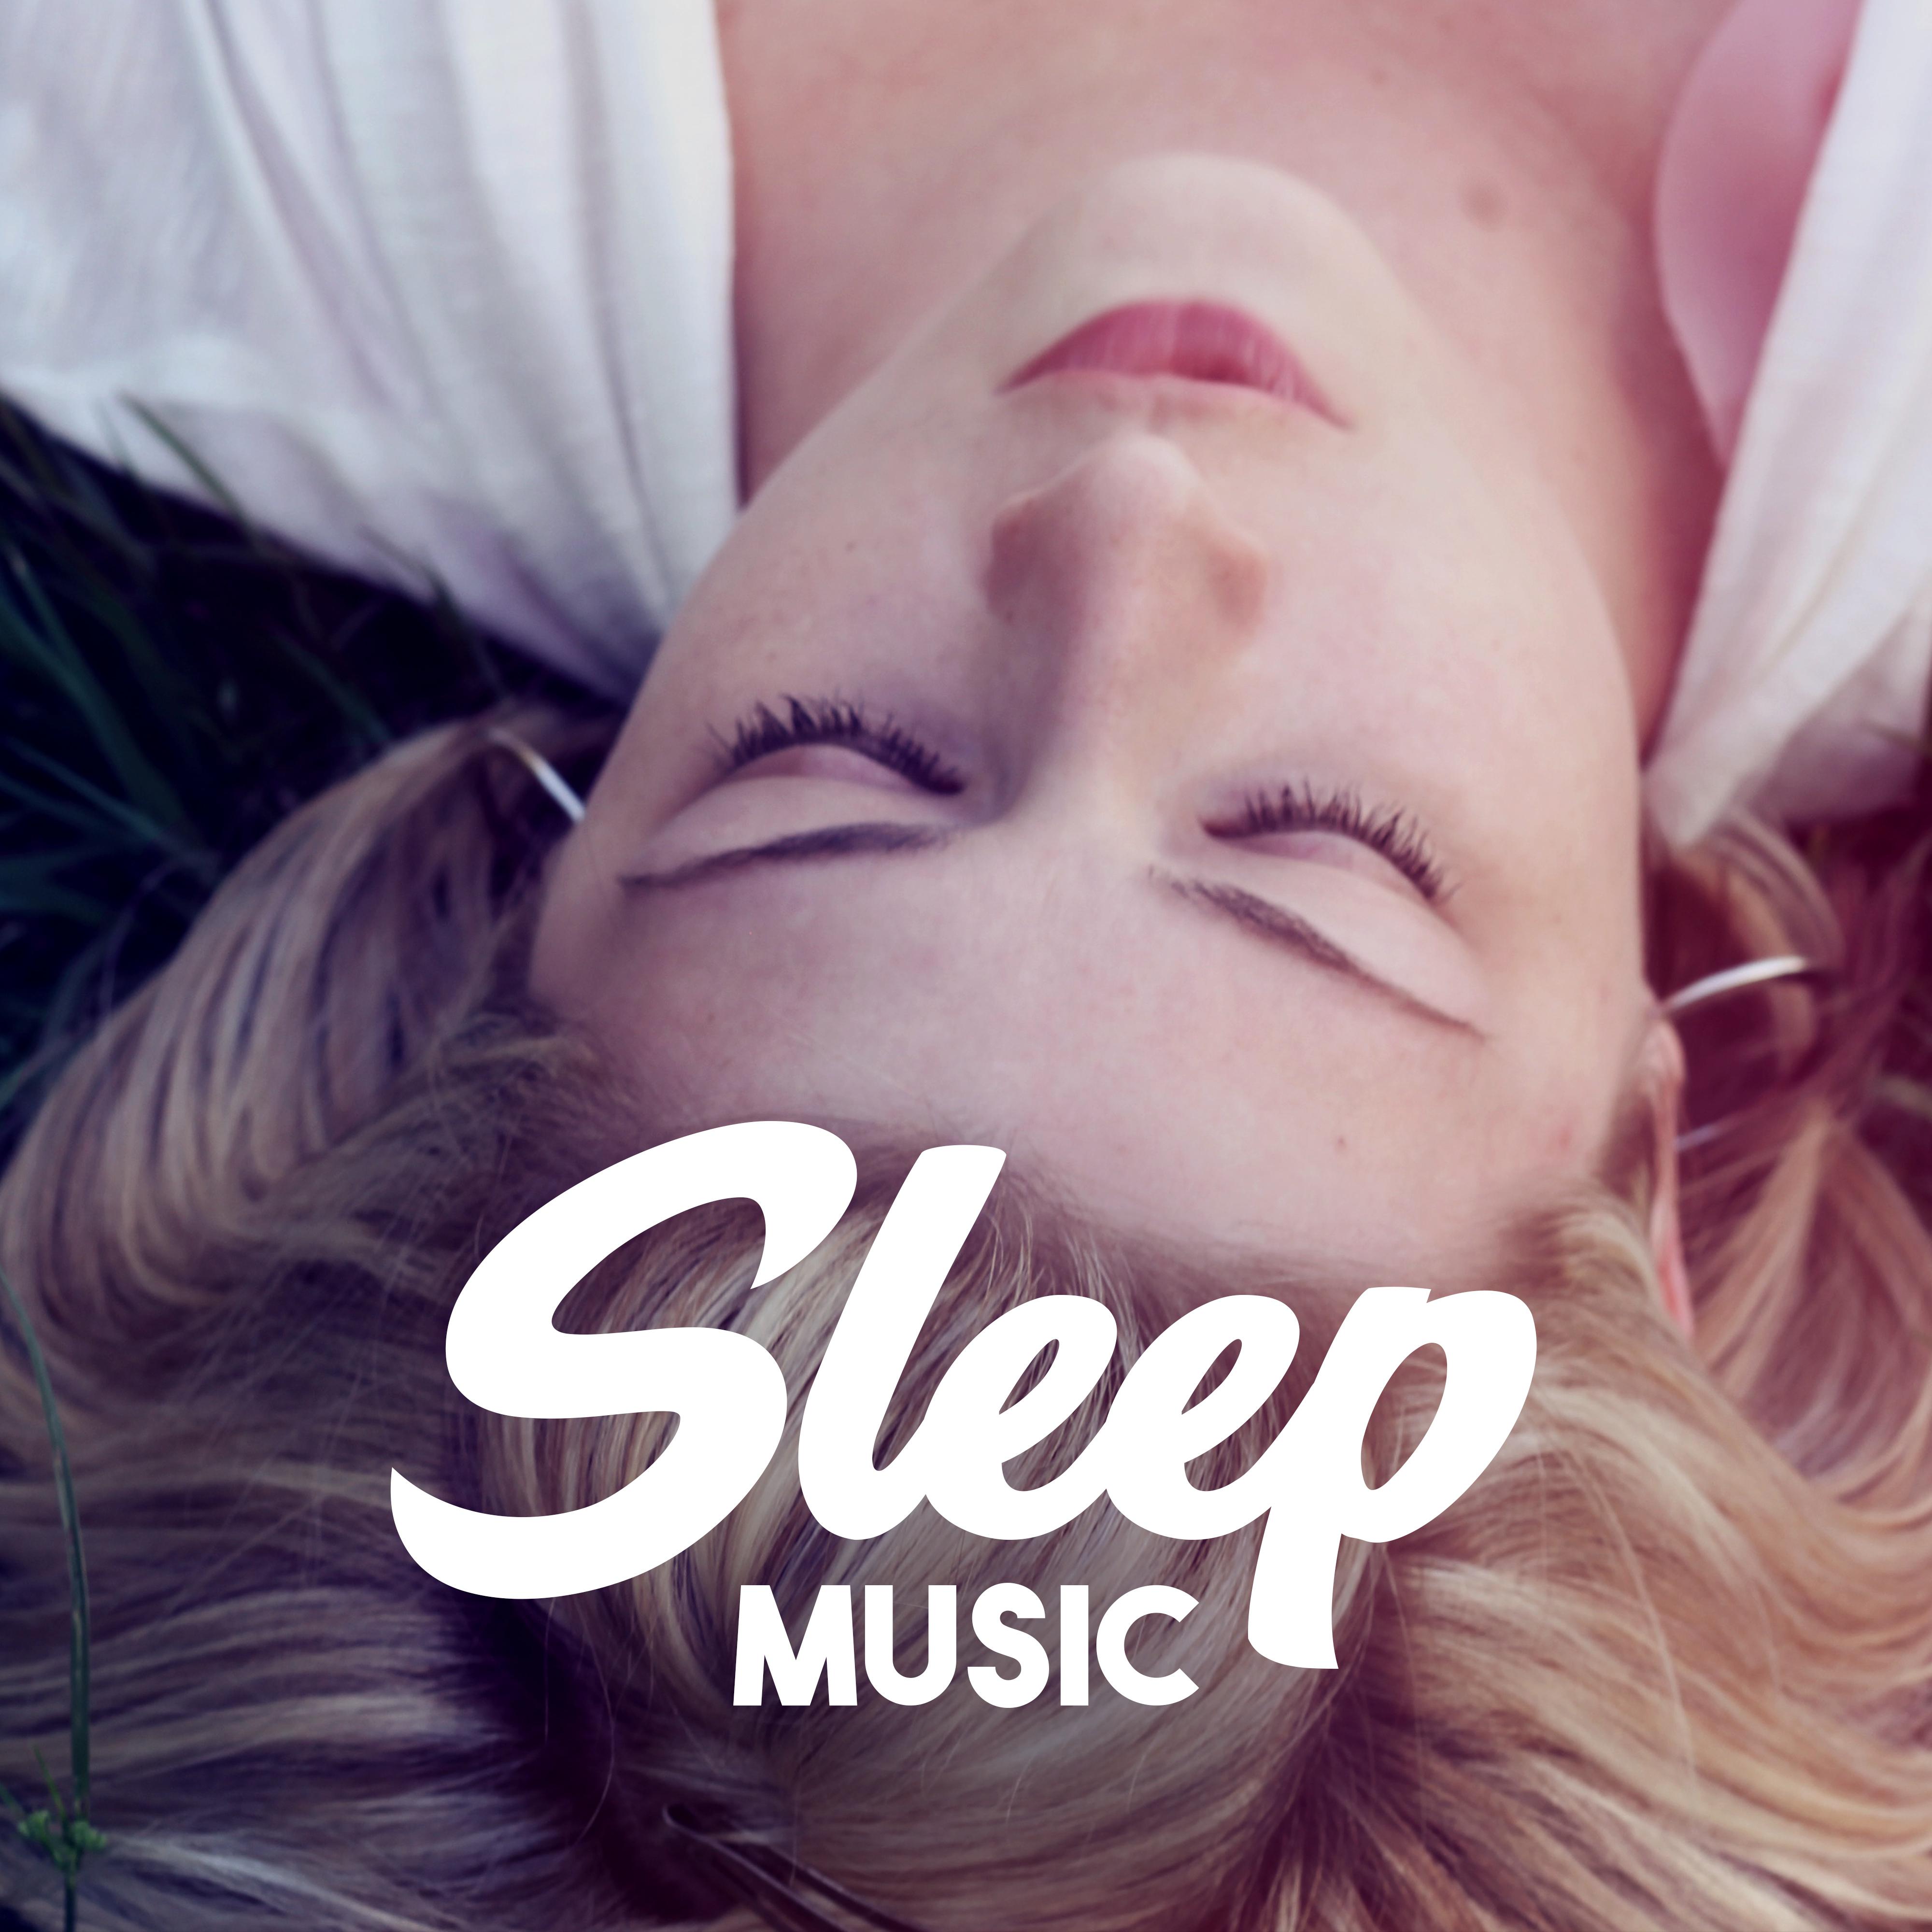 Sleep Music  Chill Out, Music for Sleep, Relaxation, Calm Vibes, Smooth Chillout